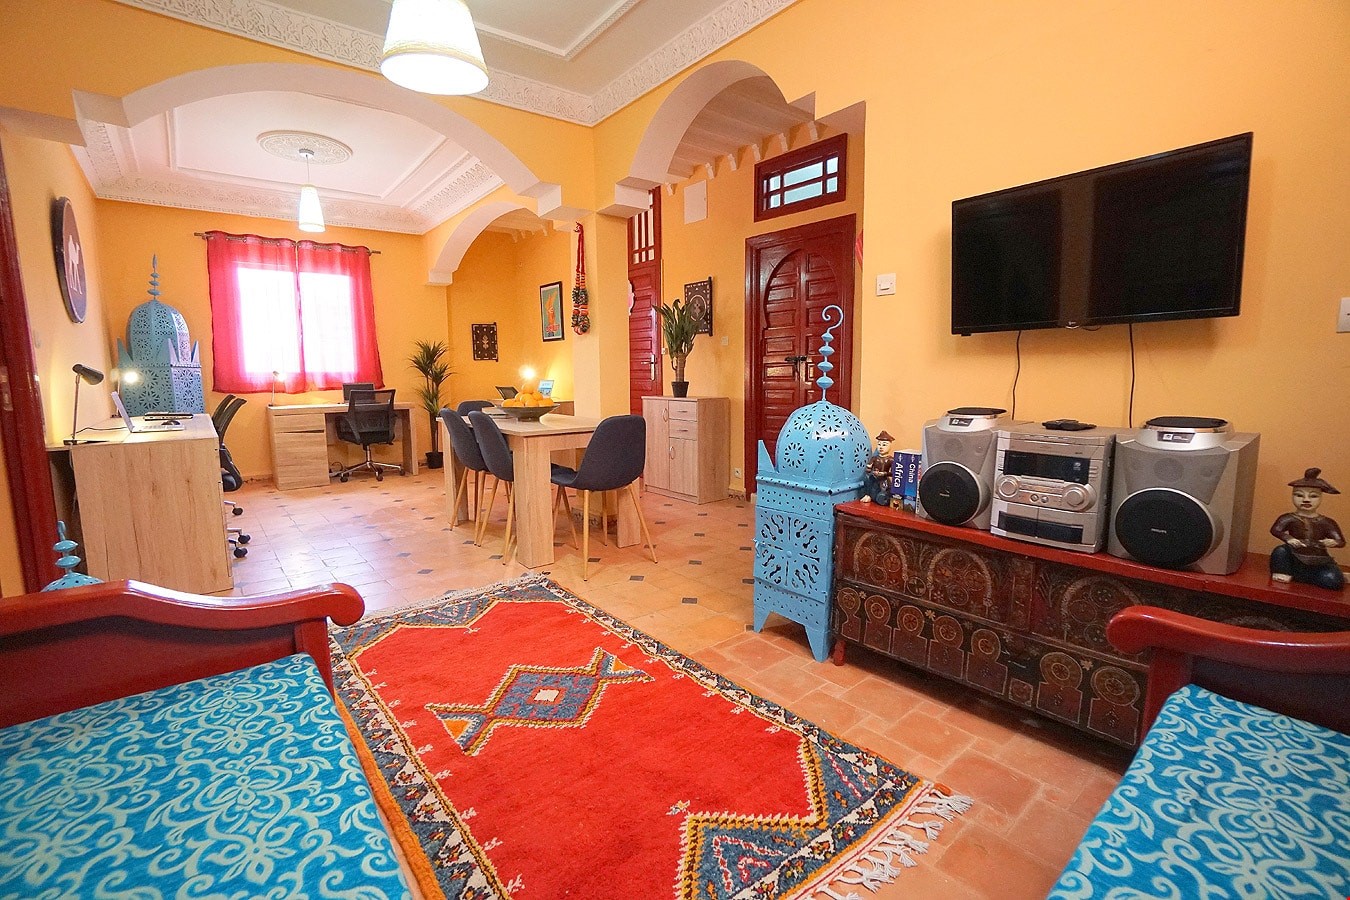 Hotel Ouarzazate Morocco nomad remote 9ba36a34-8ee5-4915-b2f1-1c2f38b1c67f_COLIVING-SPACE-MOROCCO-2.jpg